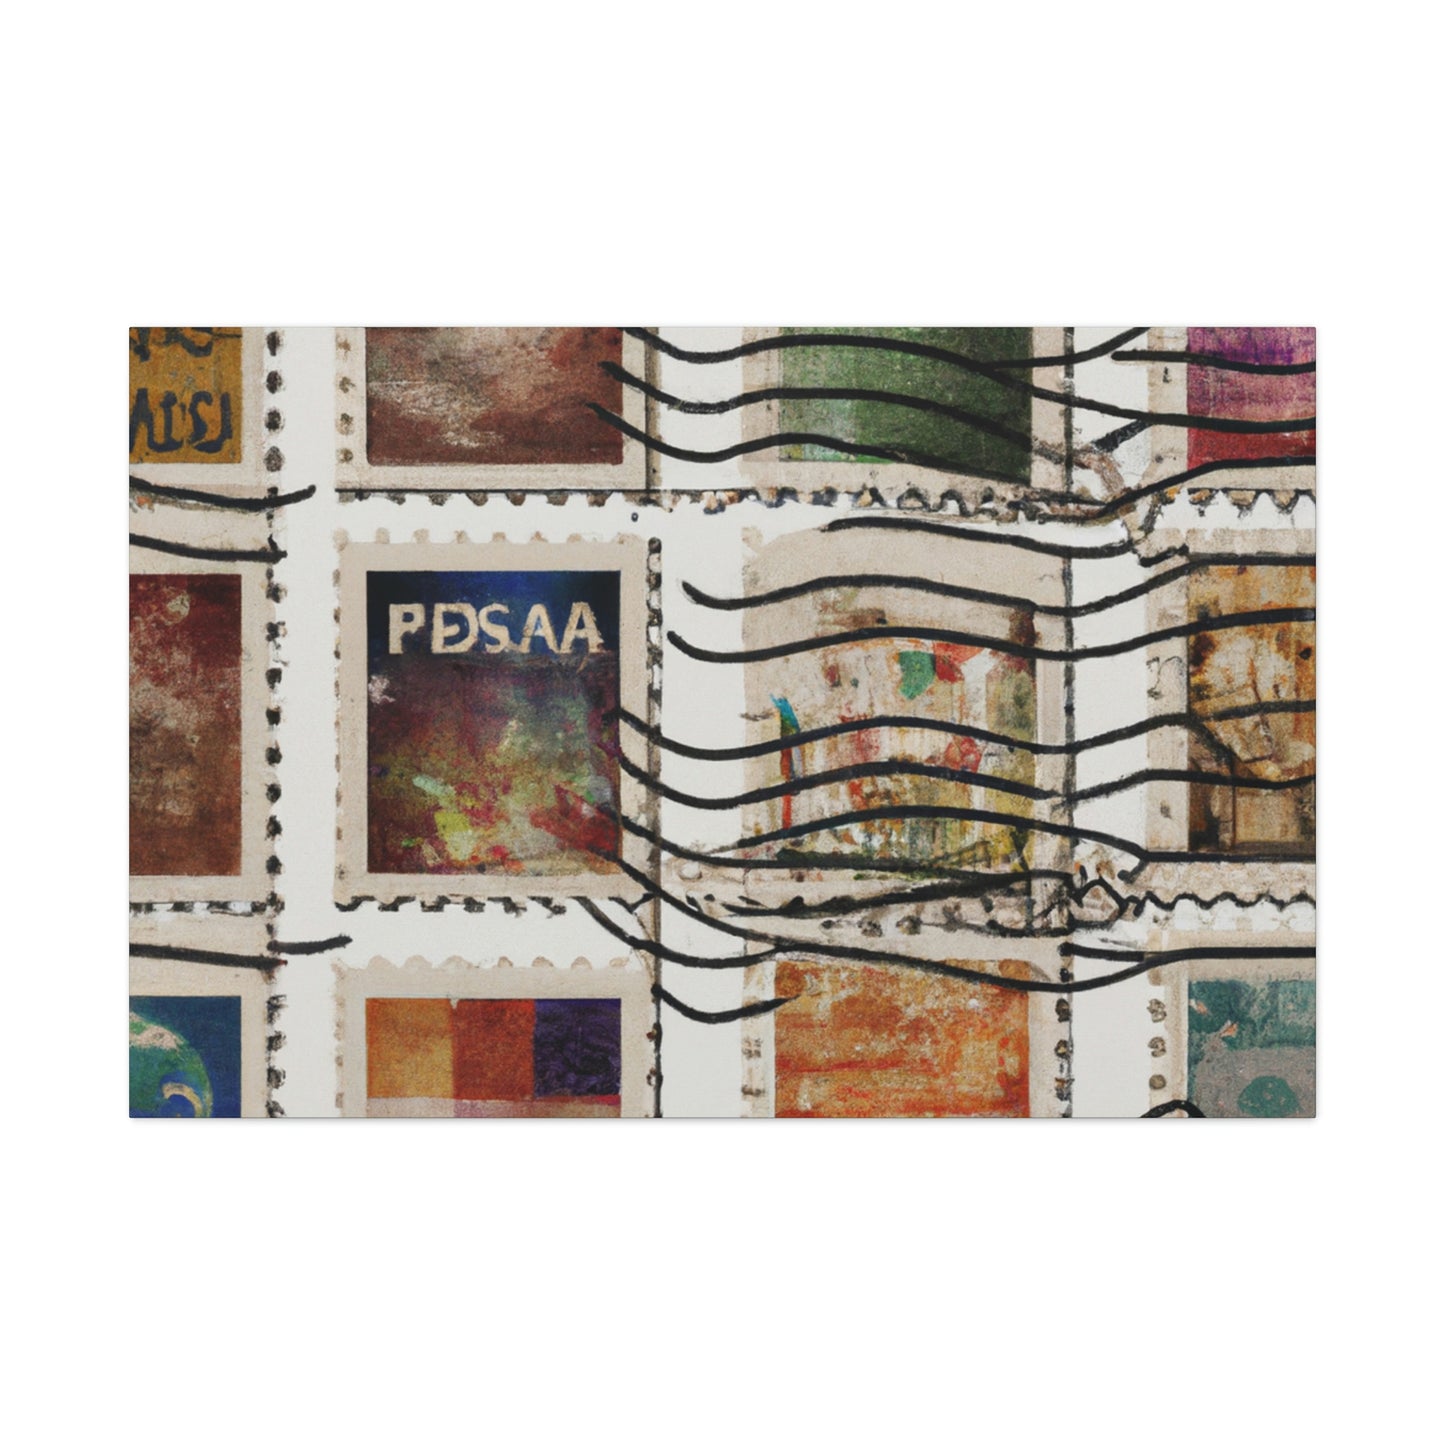 Globe-Trotting Stamps - Postage Stamp Collector Canvas Wall Art